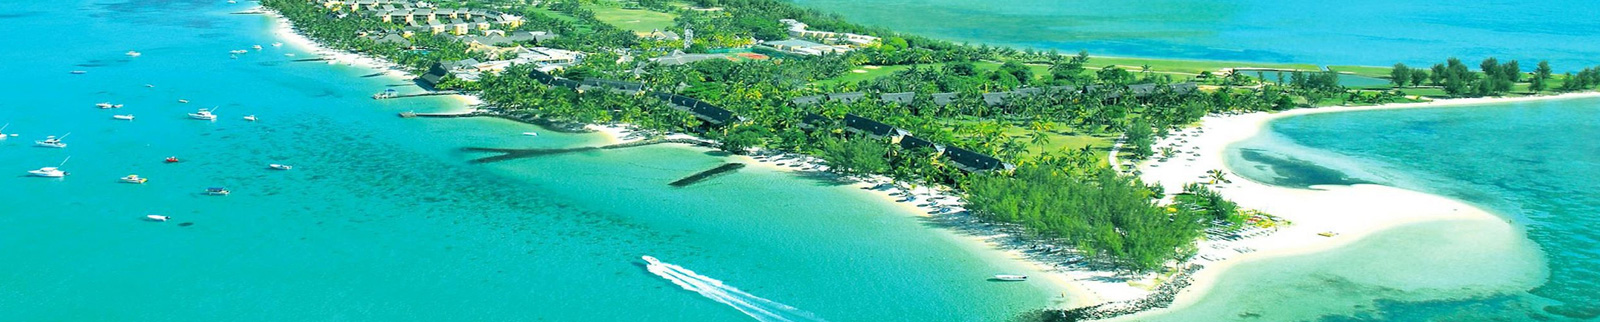 Attractions and places to visit-Tourism Mauritius / Must See Places in Mauritius & Rodrigues